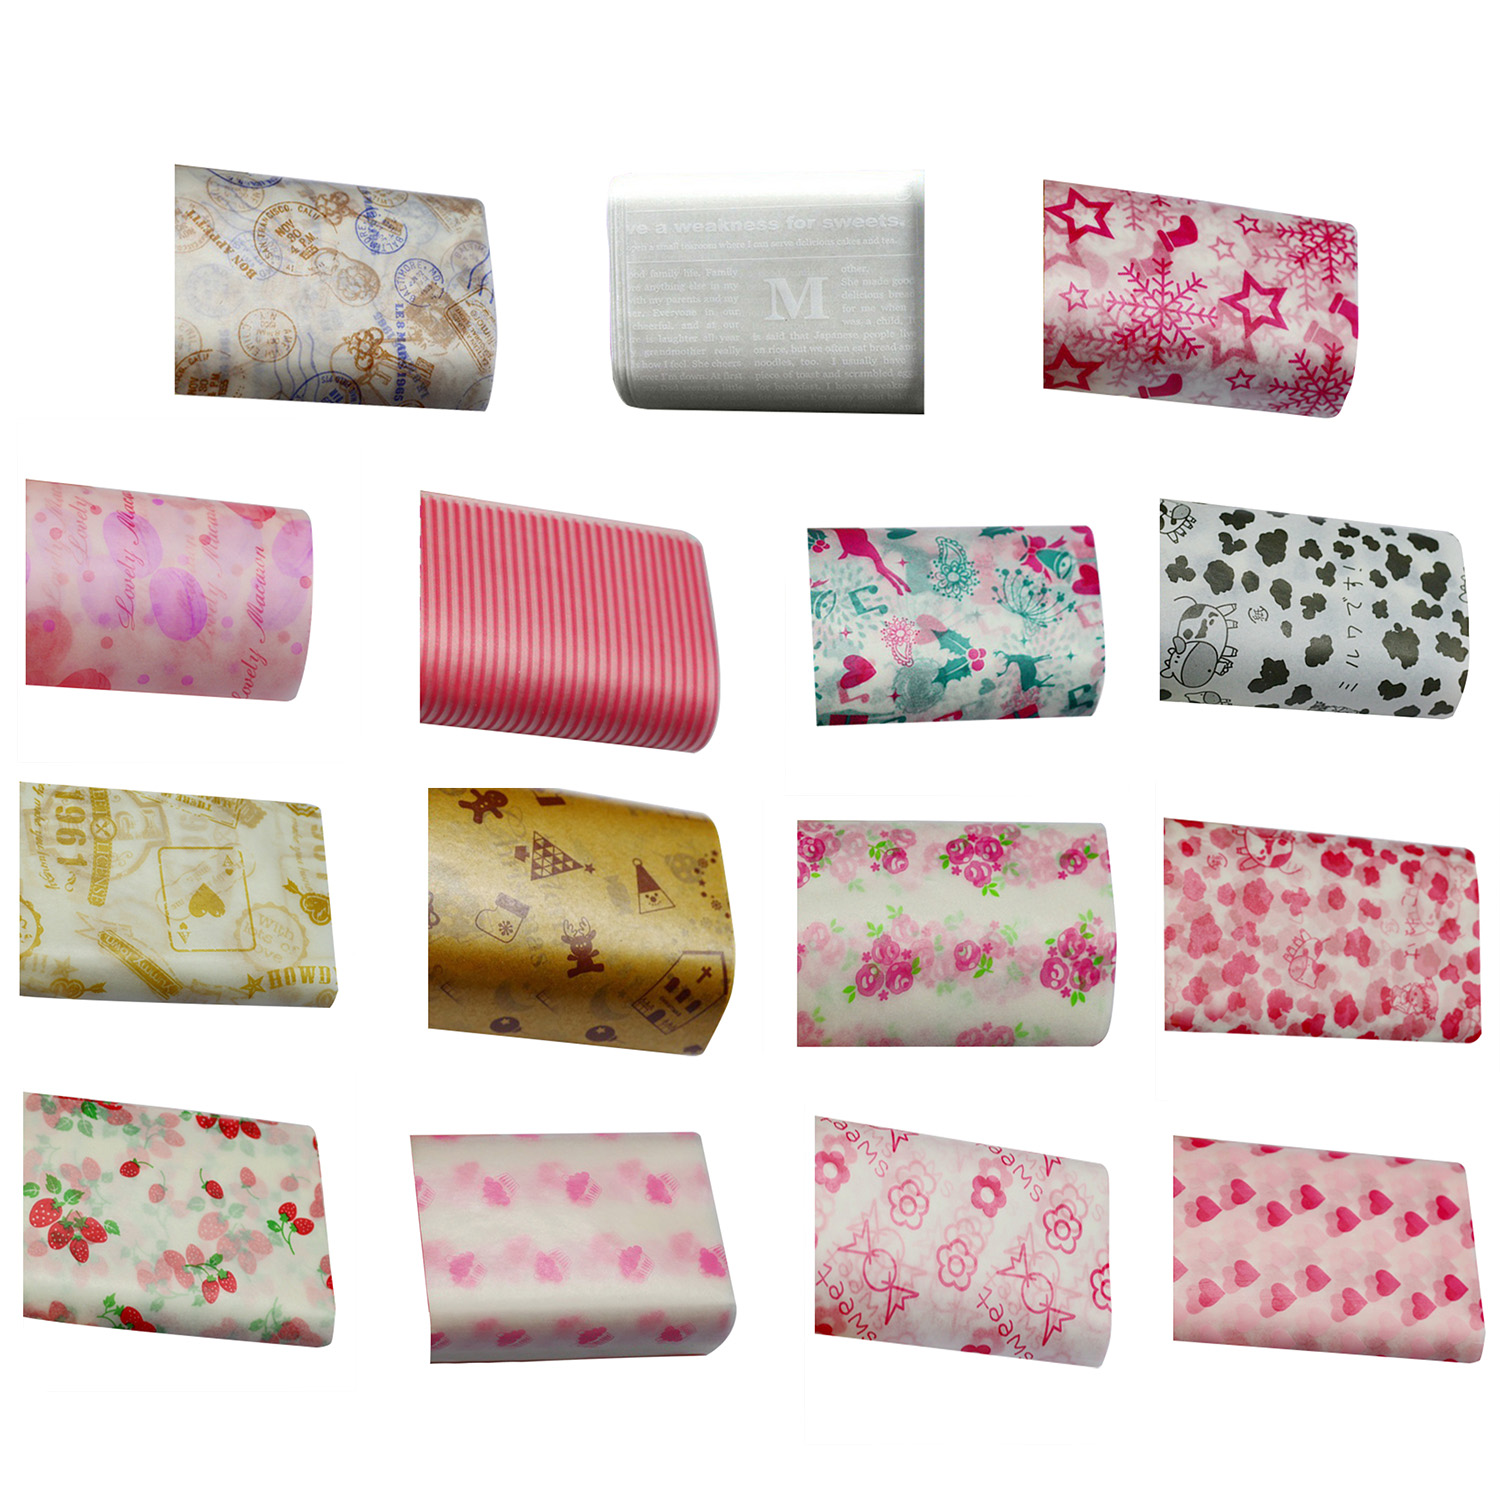 Wax Paper Food Wrapping Paper, Greaseproof Baking Paper, Soap Packaging Paper